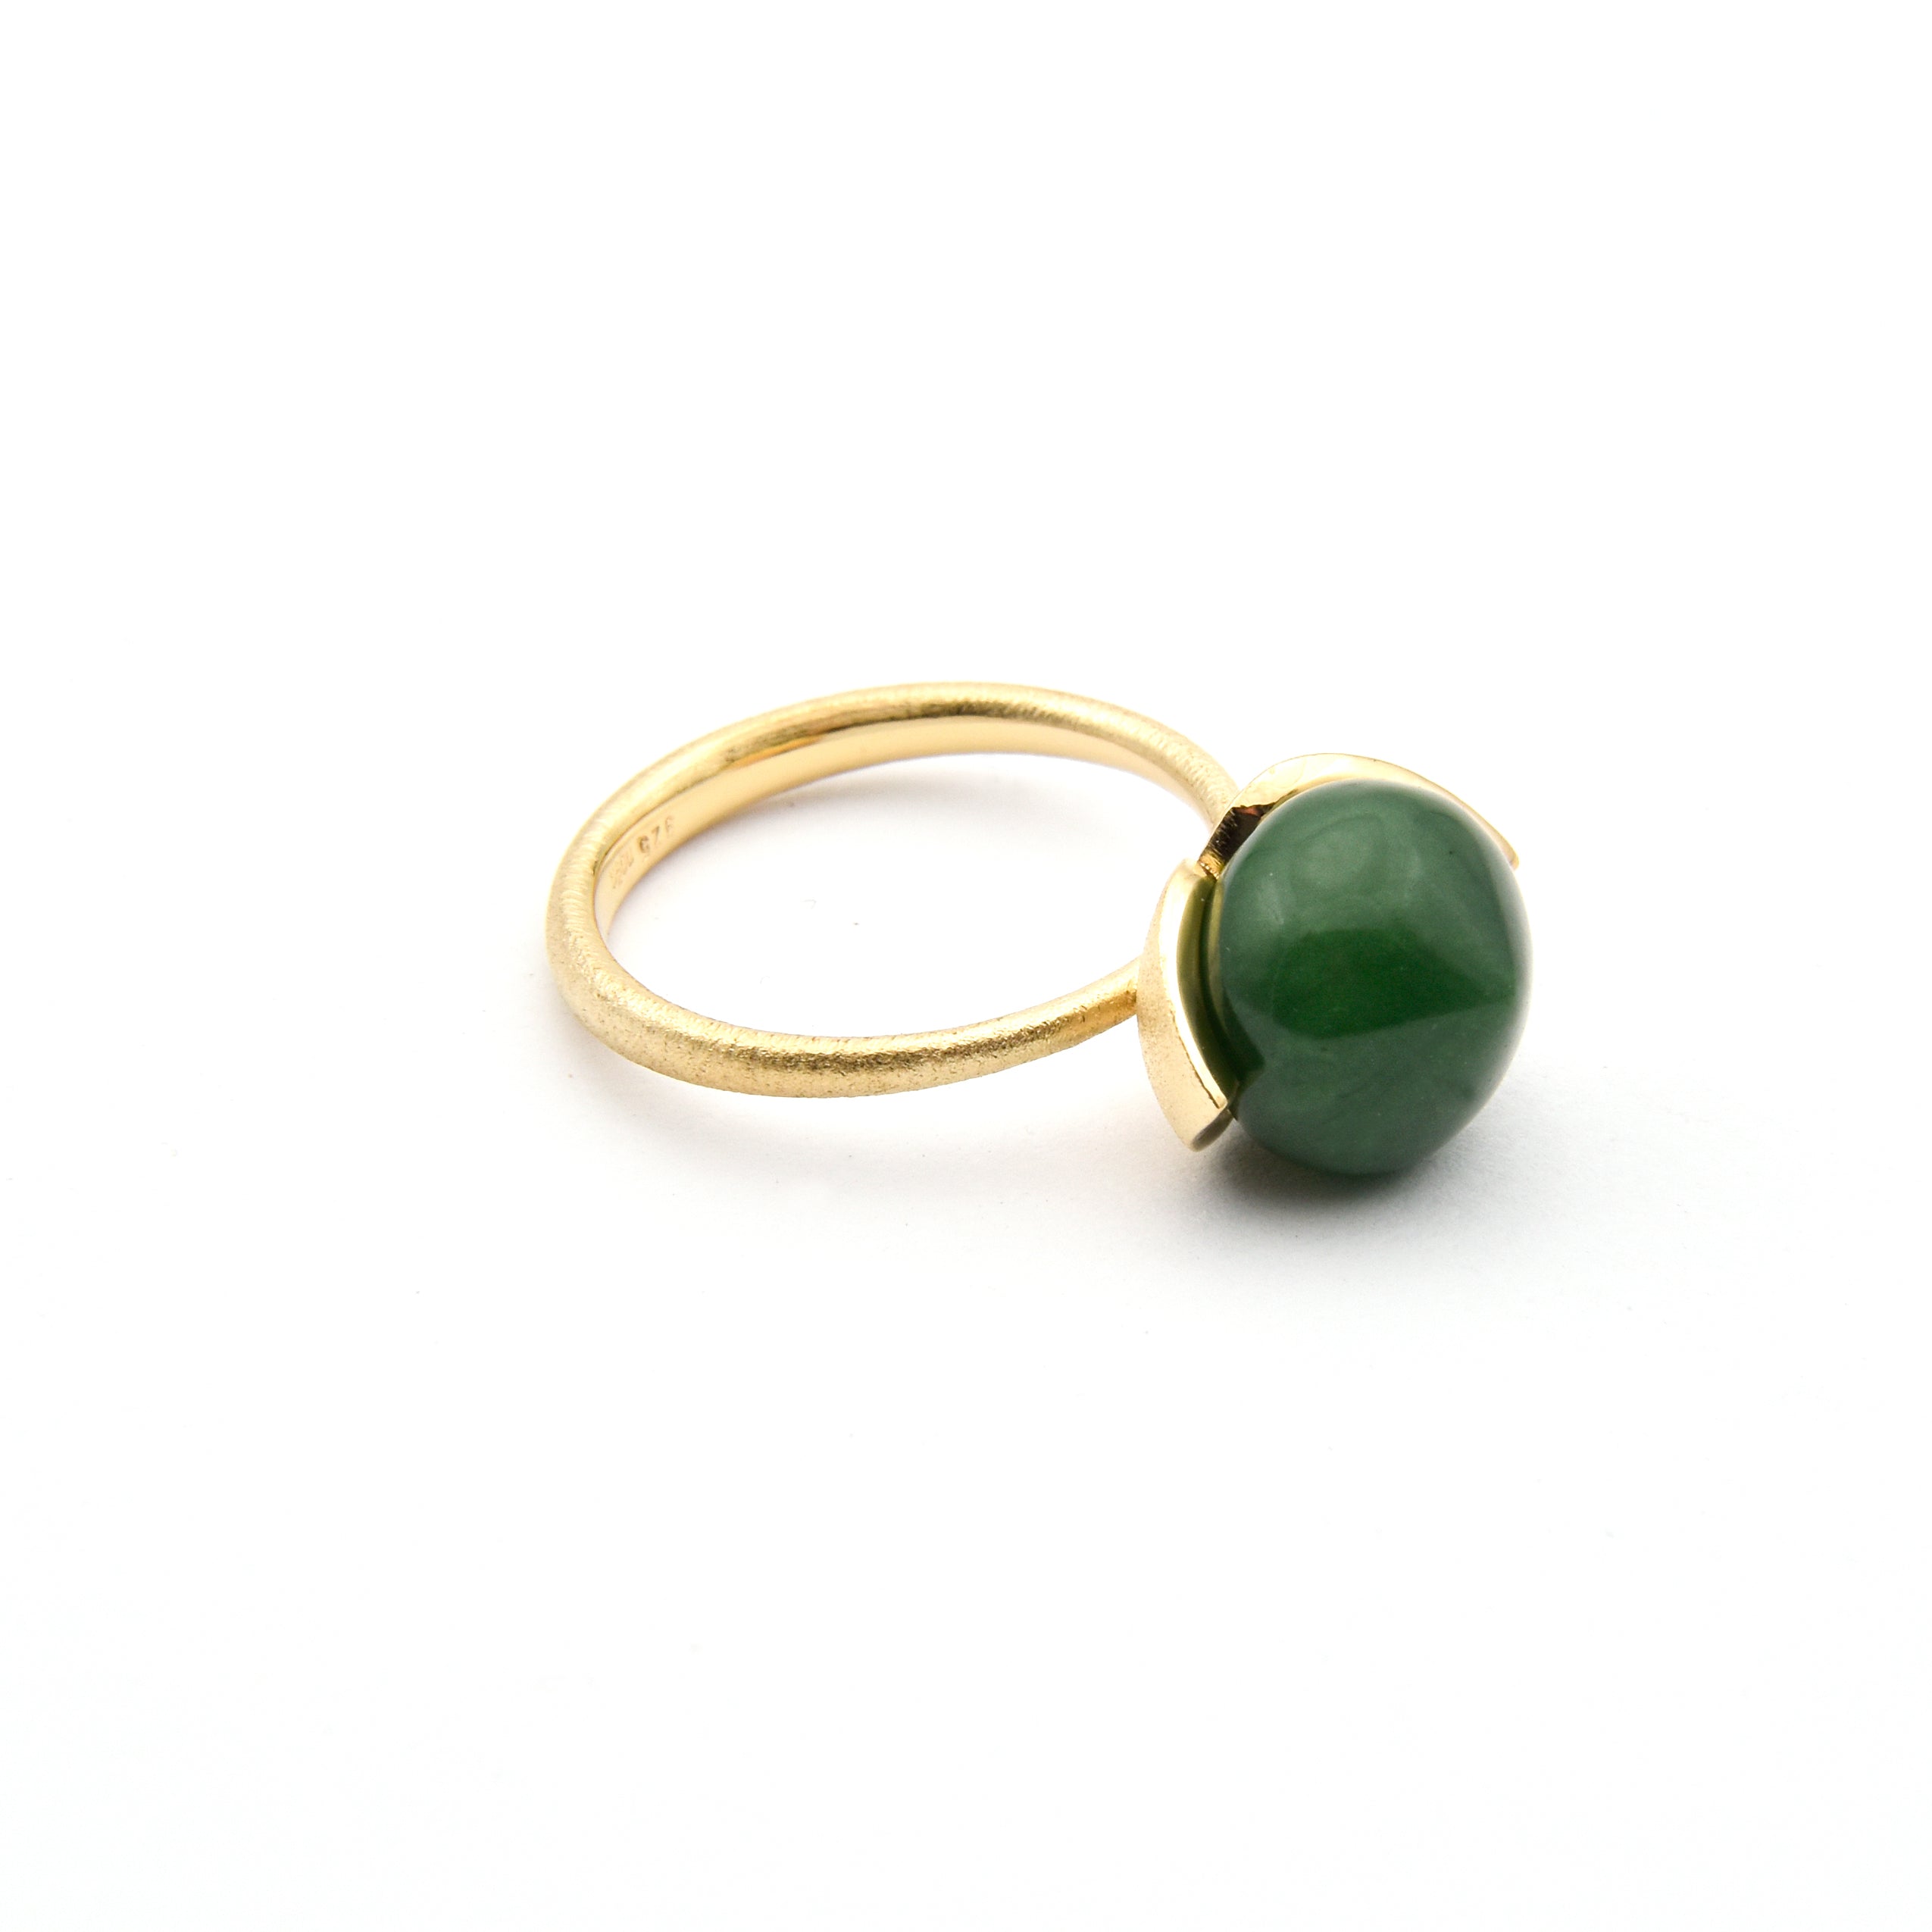 Dolce ring "medium" with jade 925/-